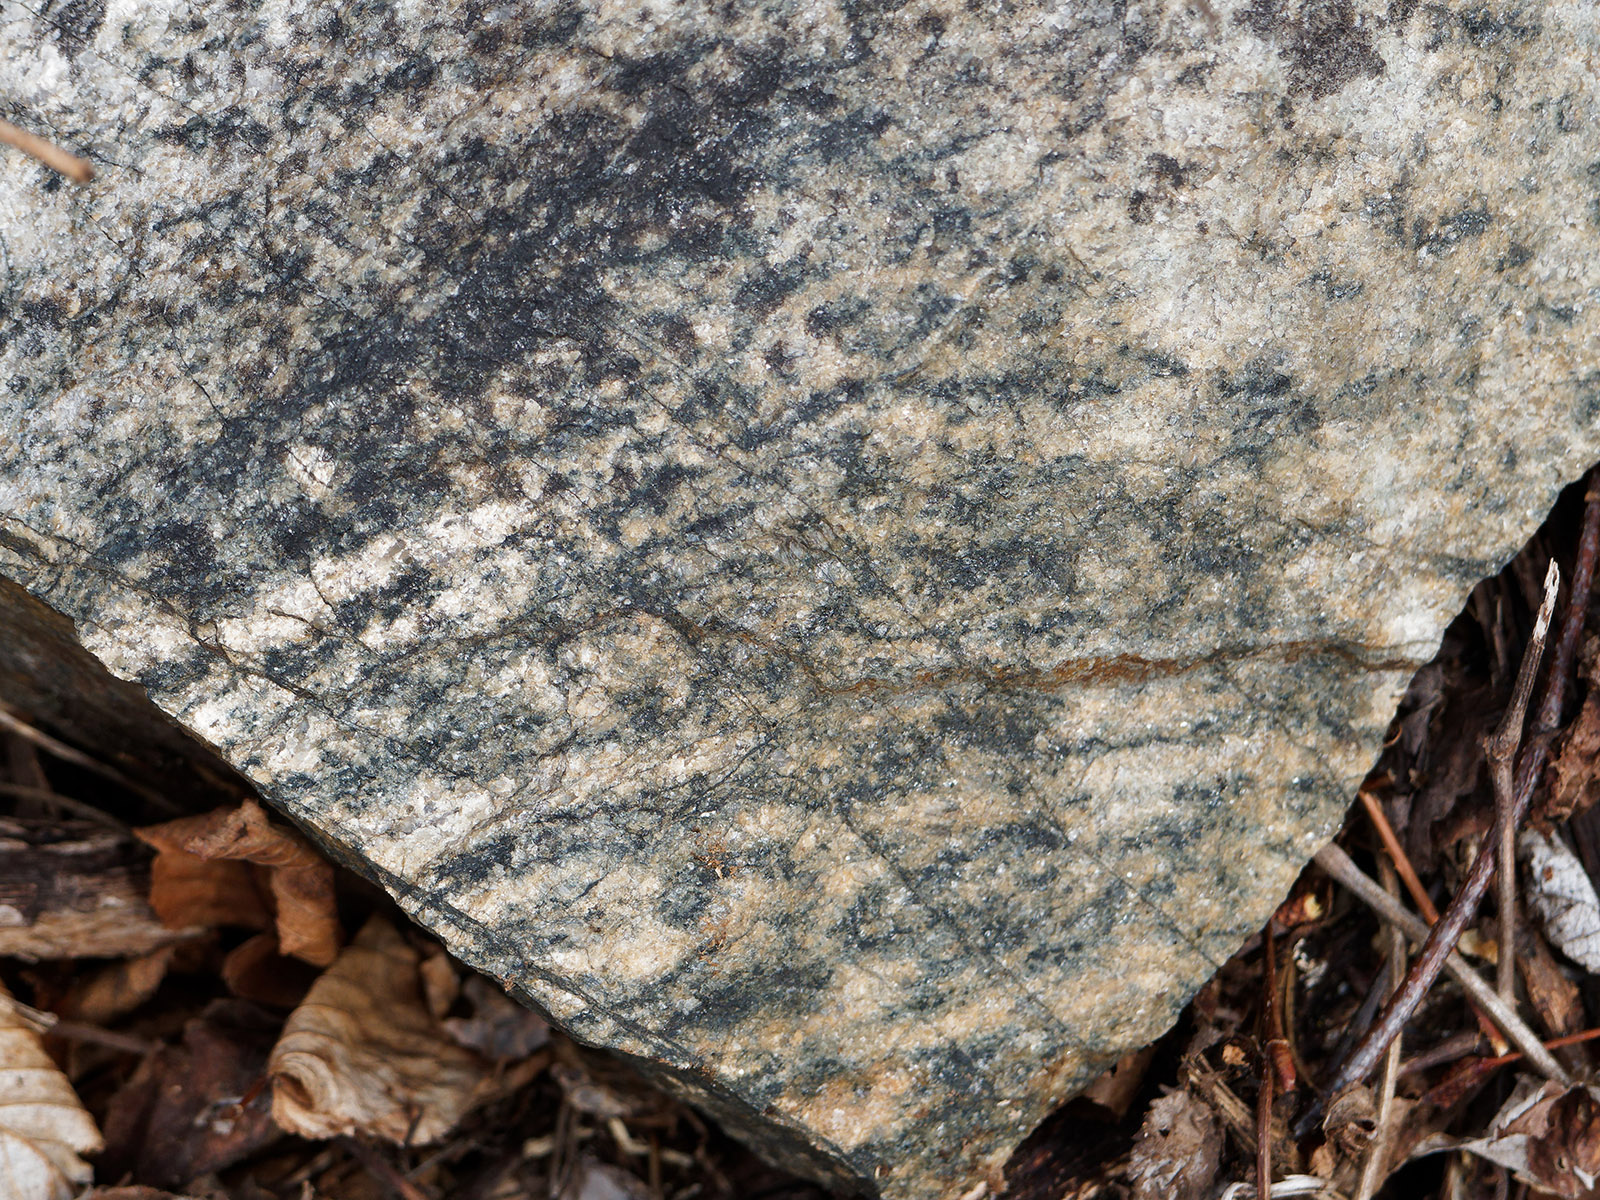 Granite gneiss showing foliation.  Granite gneiss contains quartz, high potassium feldspar and low concentration of iron and magnesium minerals.  Foliation is easy to see.  It is lighter in appearance than granodiorite gneiss.  This is from the Skyline Drive road cut next to Bacon Hollow Overlook.